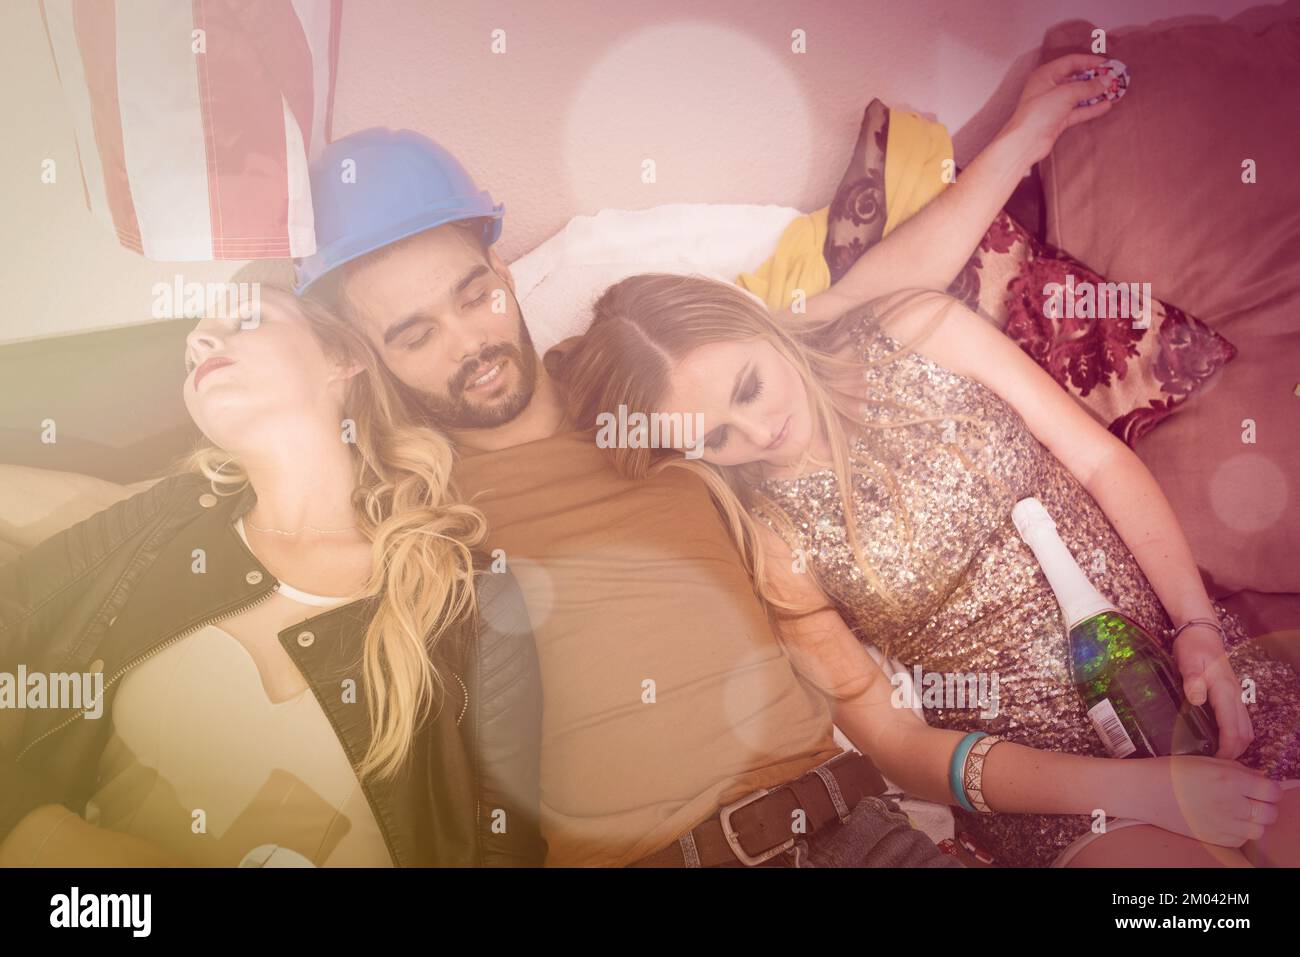 Sleeping, drunk and party with friends on sofa with hangover from celebration, social and spring break. New year, festive and champagne with people Stock Photo